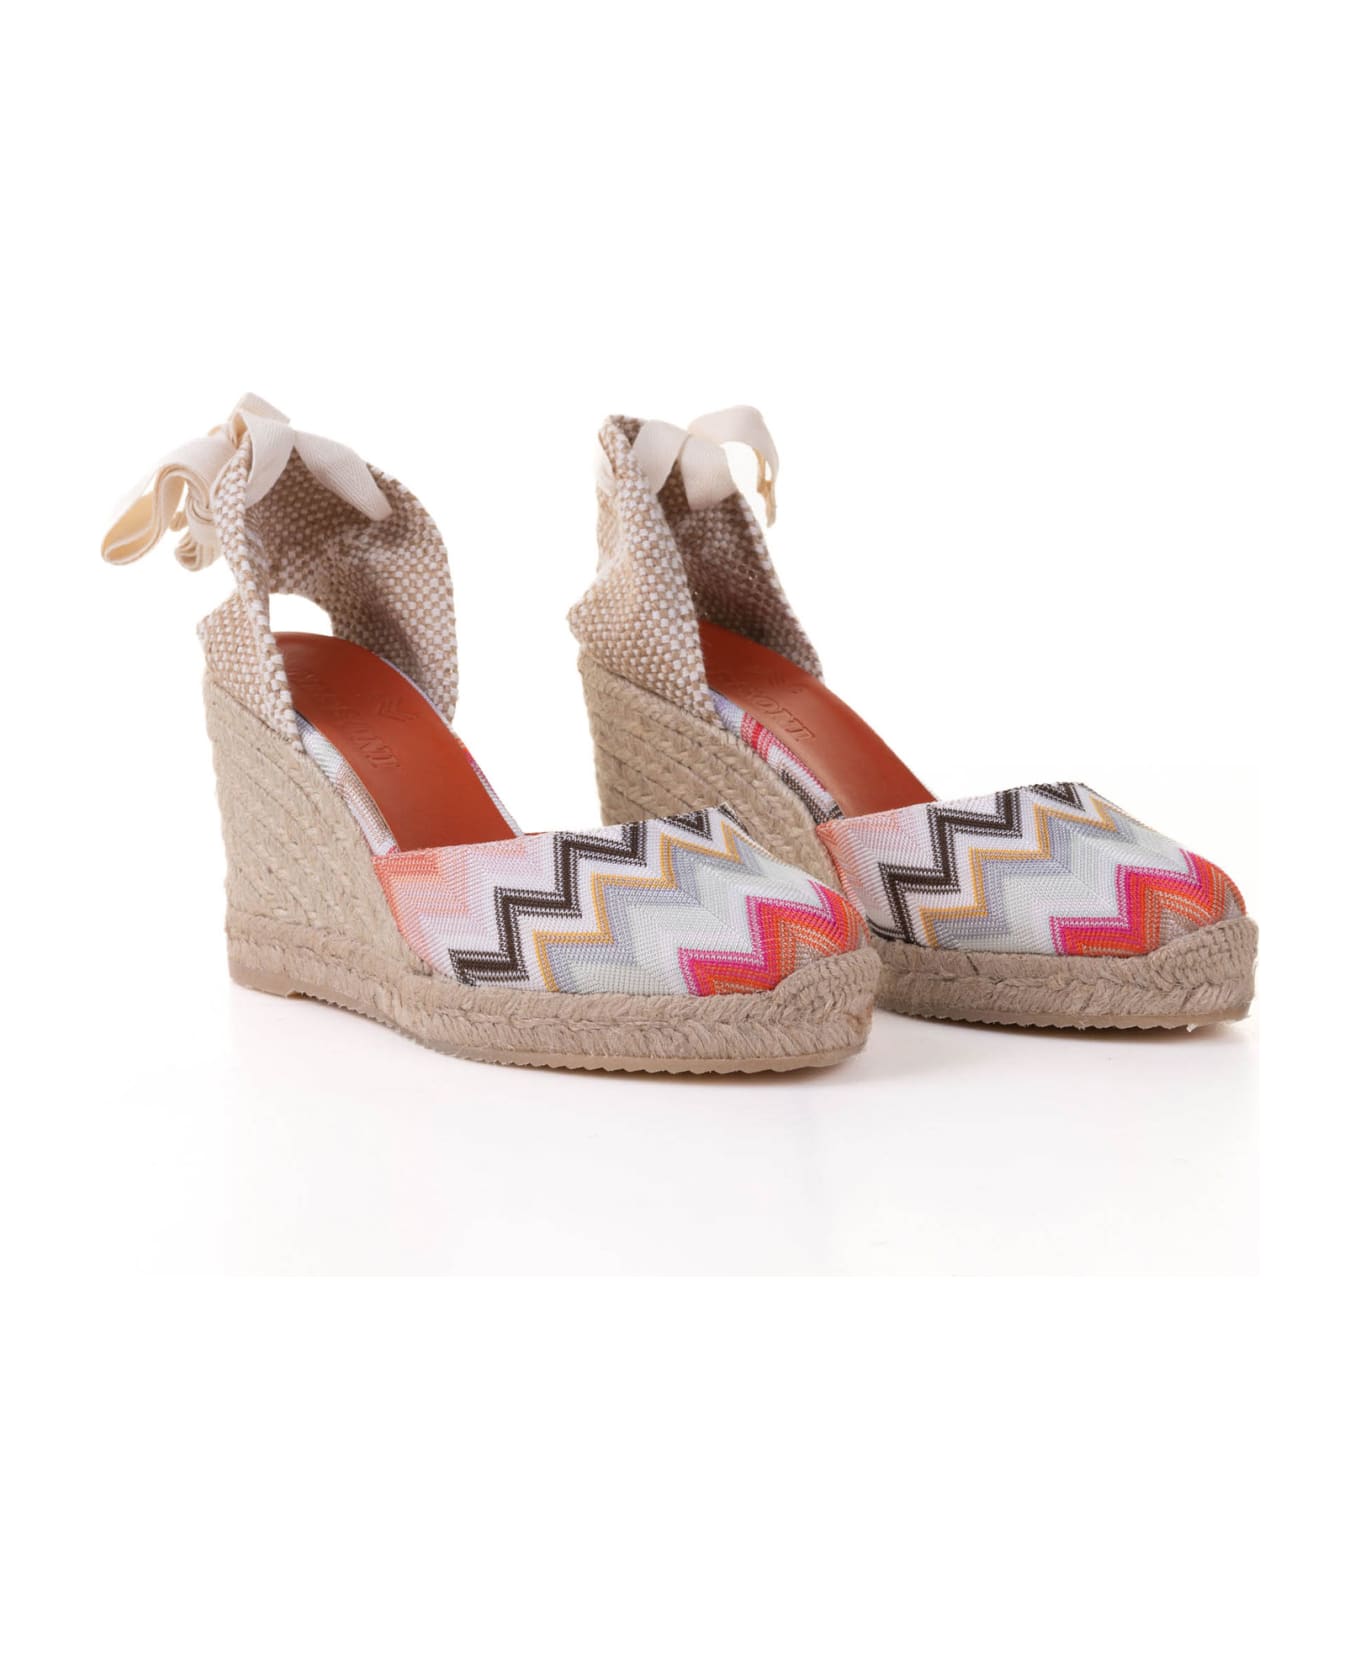 Missoni Espadrilles In Chevron Fabric With Wedge And Ankle Laces - PINK サンダル